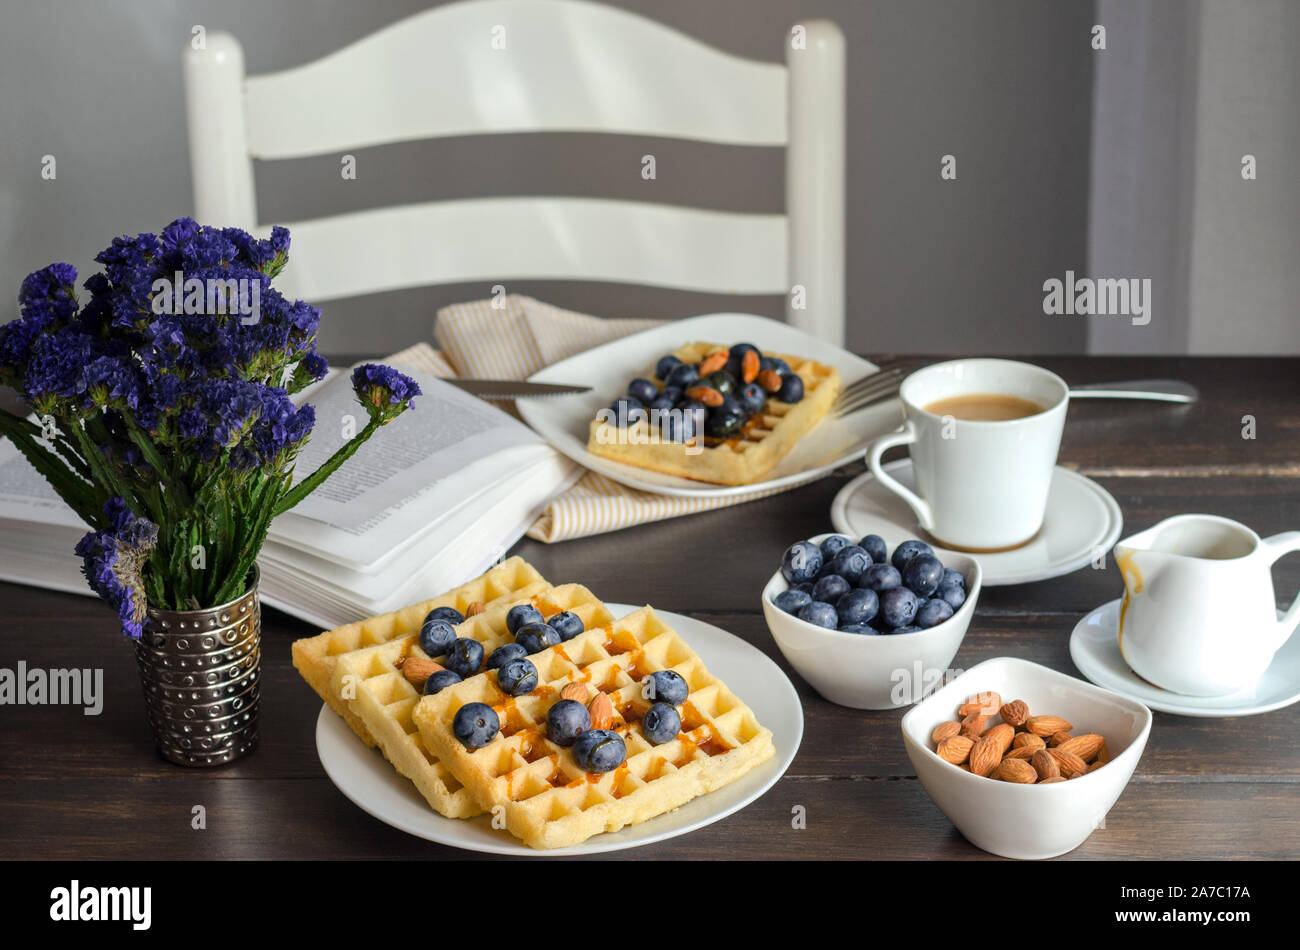 Belgian waffle decorated  with blueberries and nuts, open book on wooden table for perfect  breakfast at Sunday. Homemade dessert background. Relax mo Stock Photo